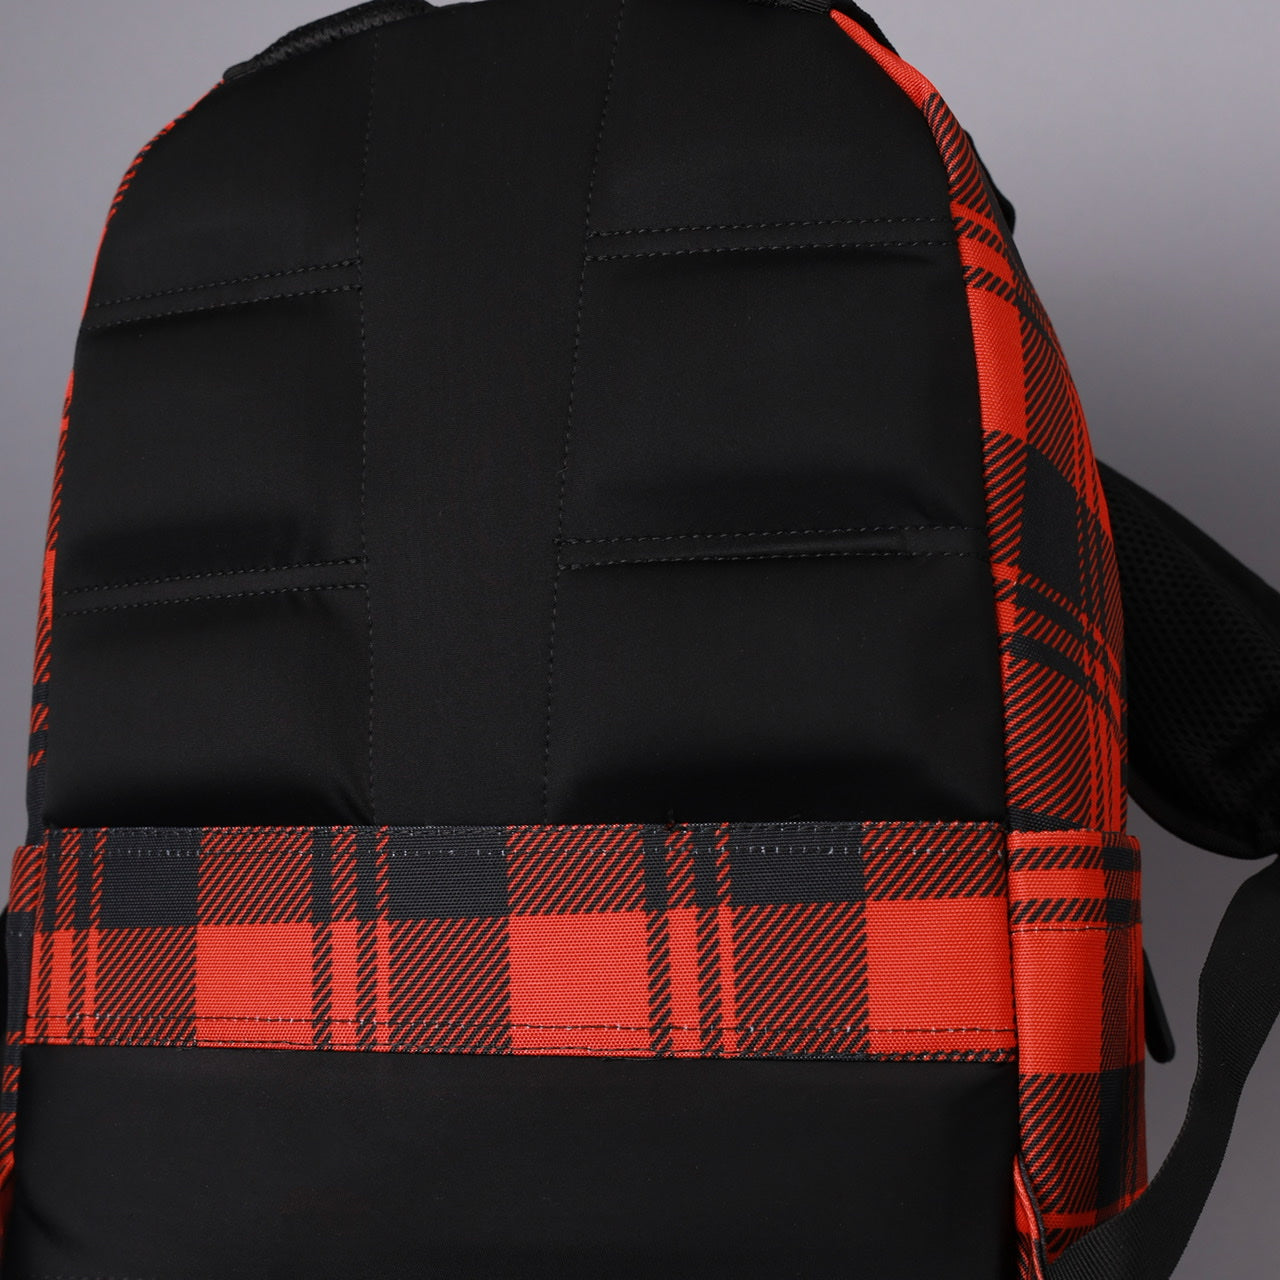 Buffalo Red Plaid Classic Backpack